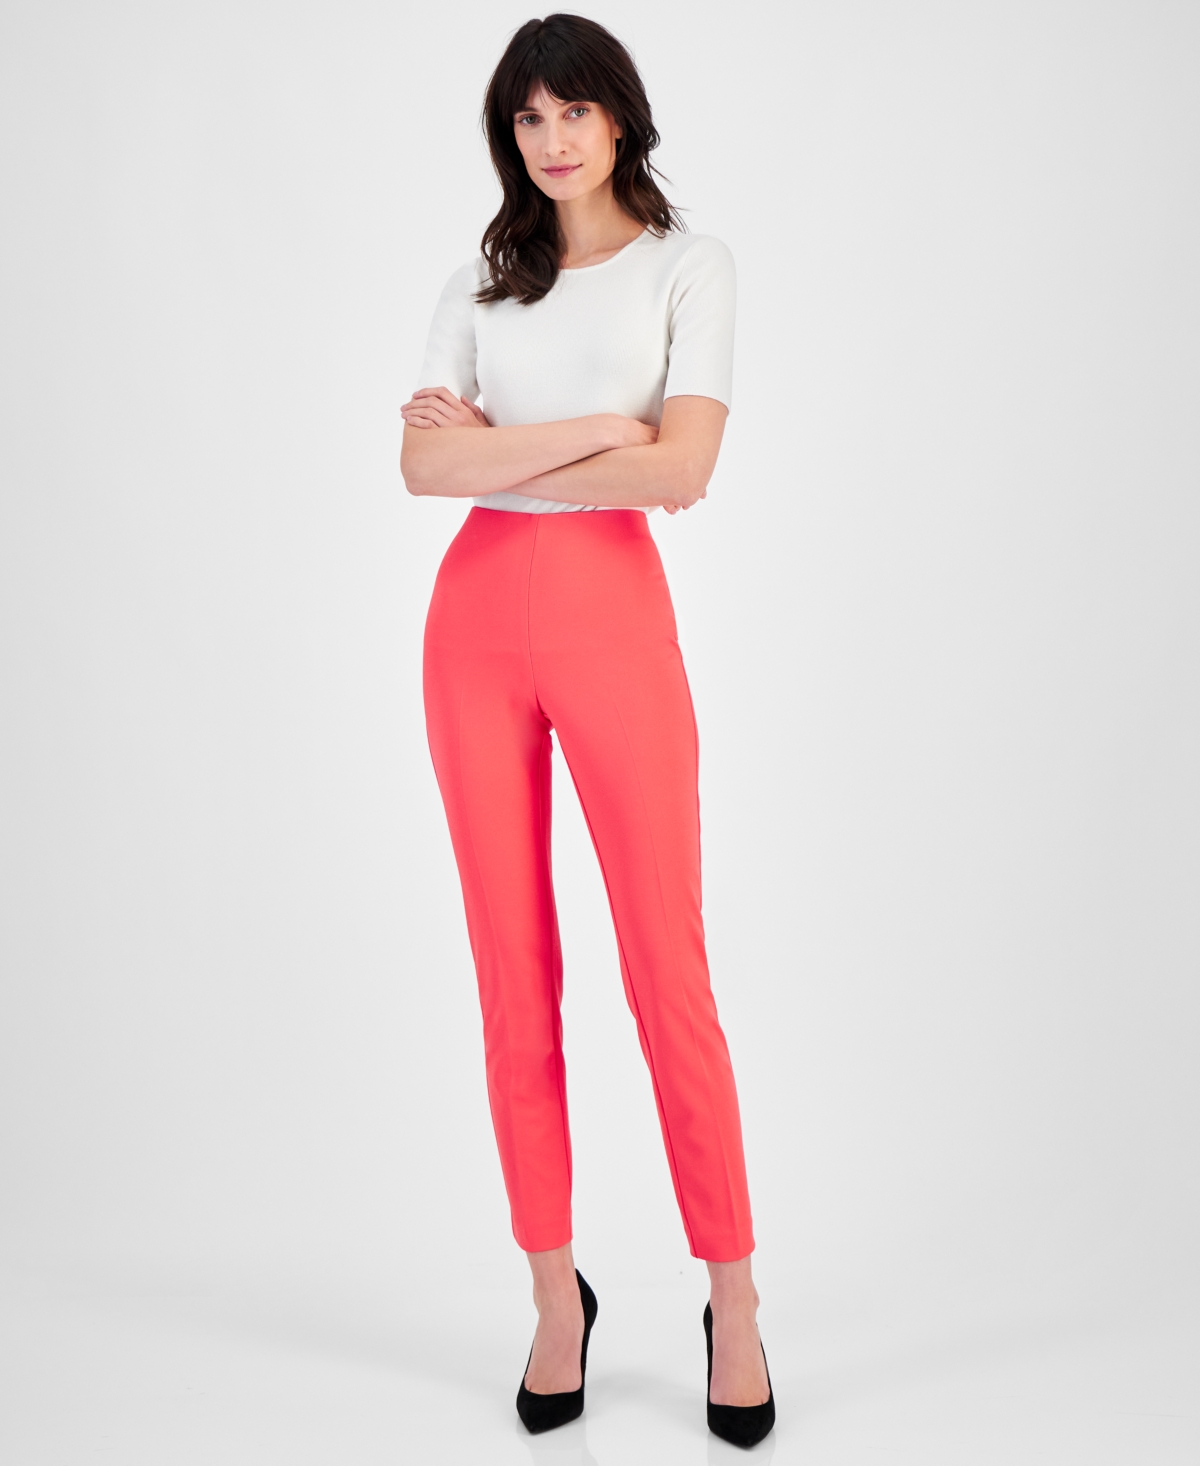 Women's Hollywood Pull-On Slim-Leg Ankle Pants - Red Pear